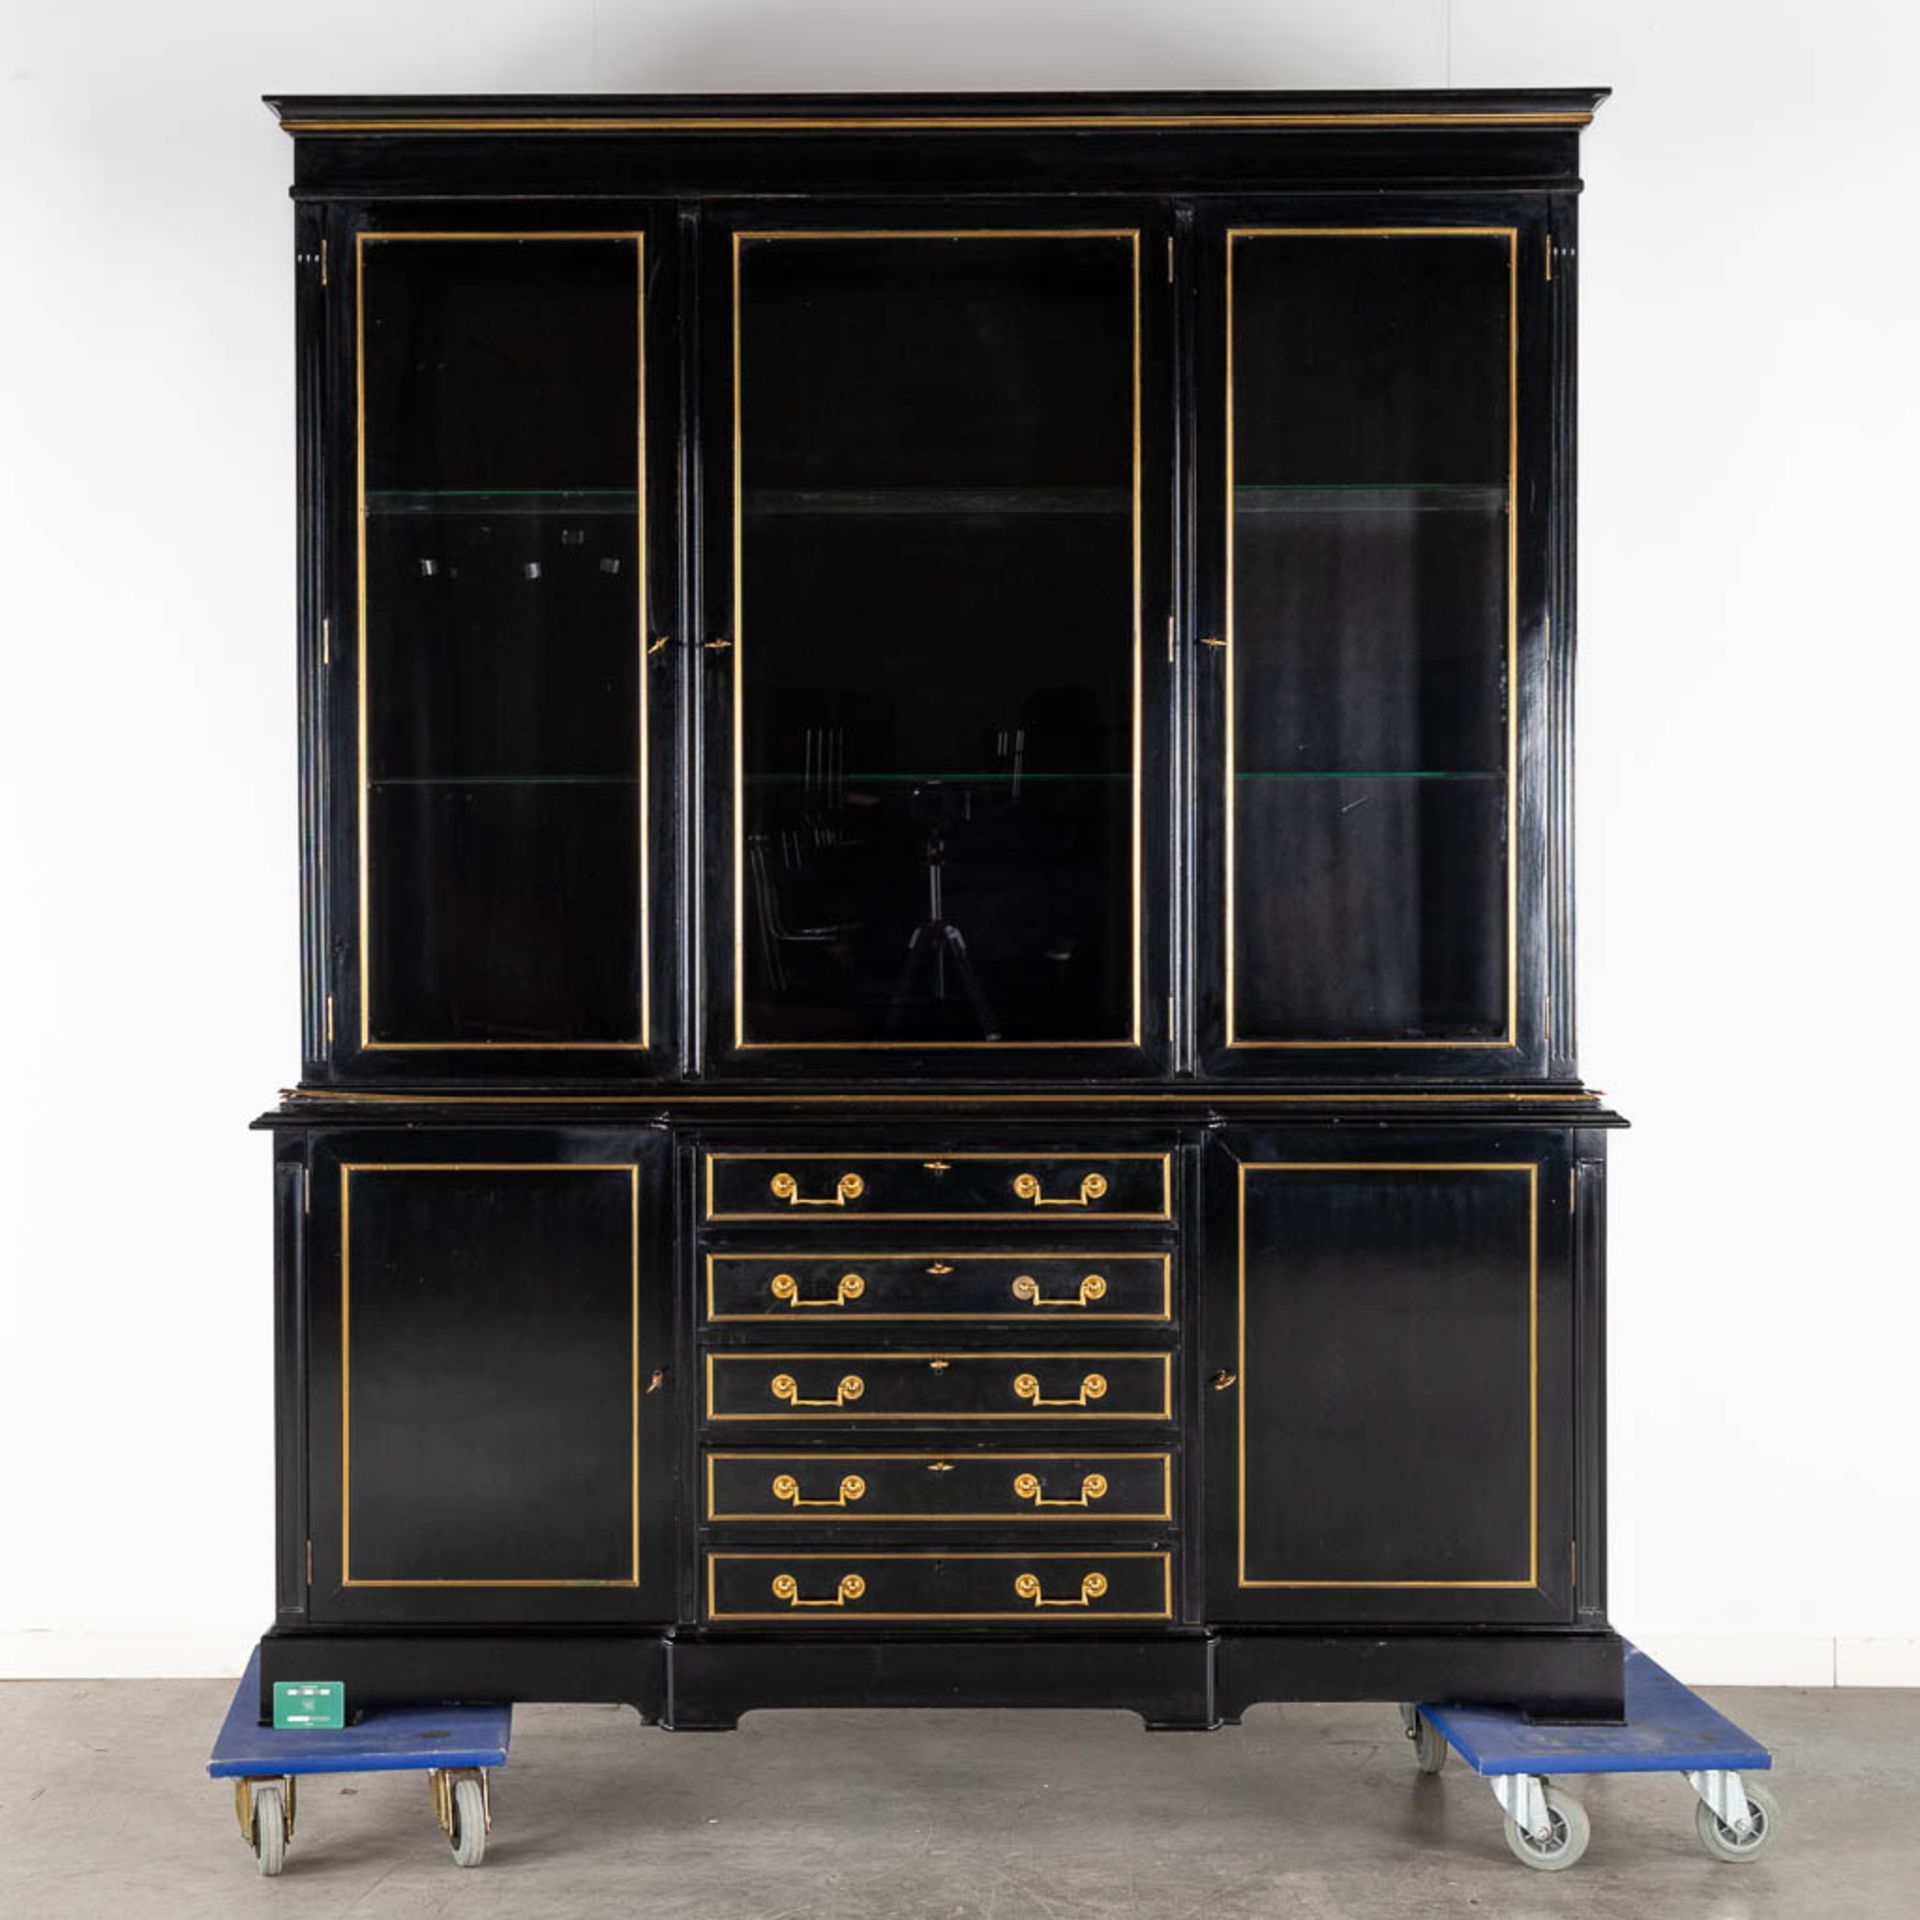 A black lacquered bookcase with gilt hardware. 20th C. (D:42 x W:167 x H:198 cm) - Image 2 of 13